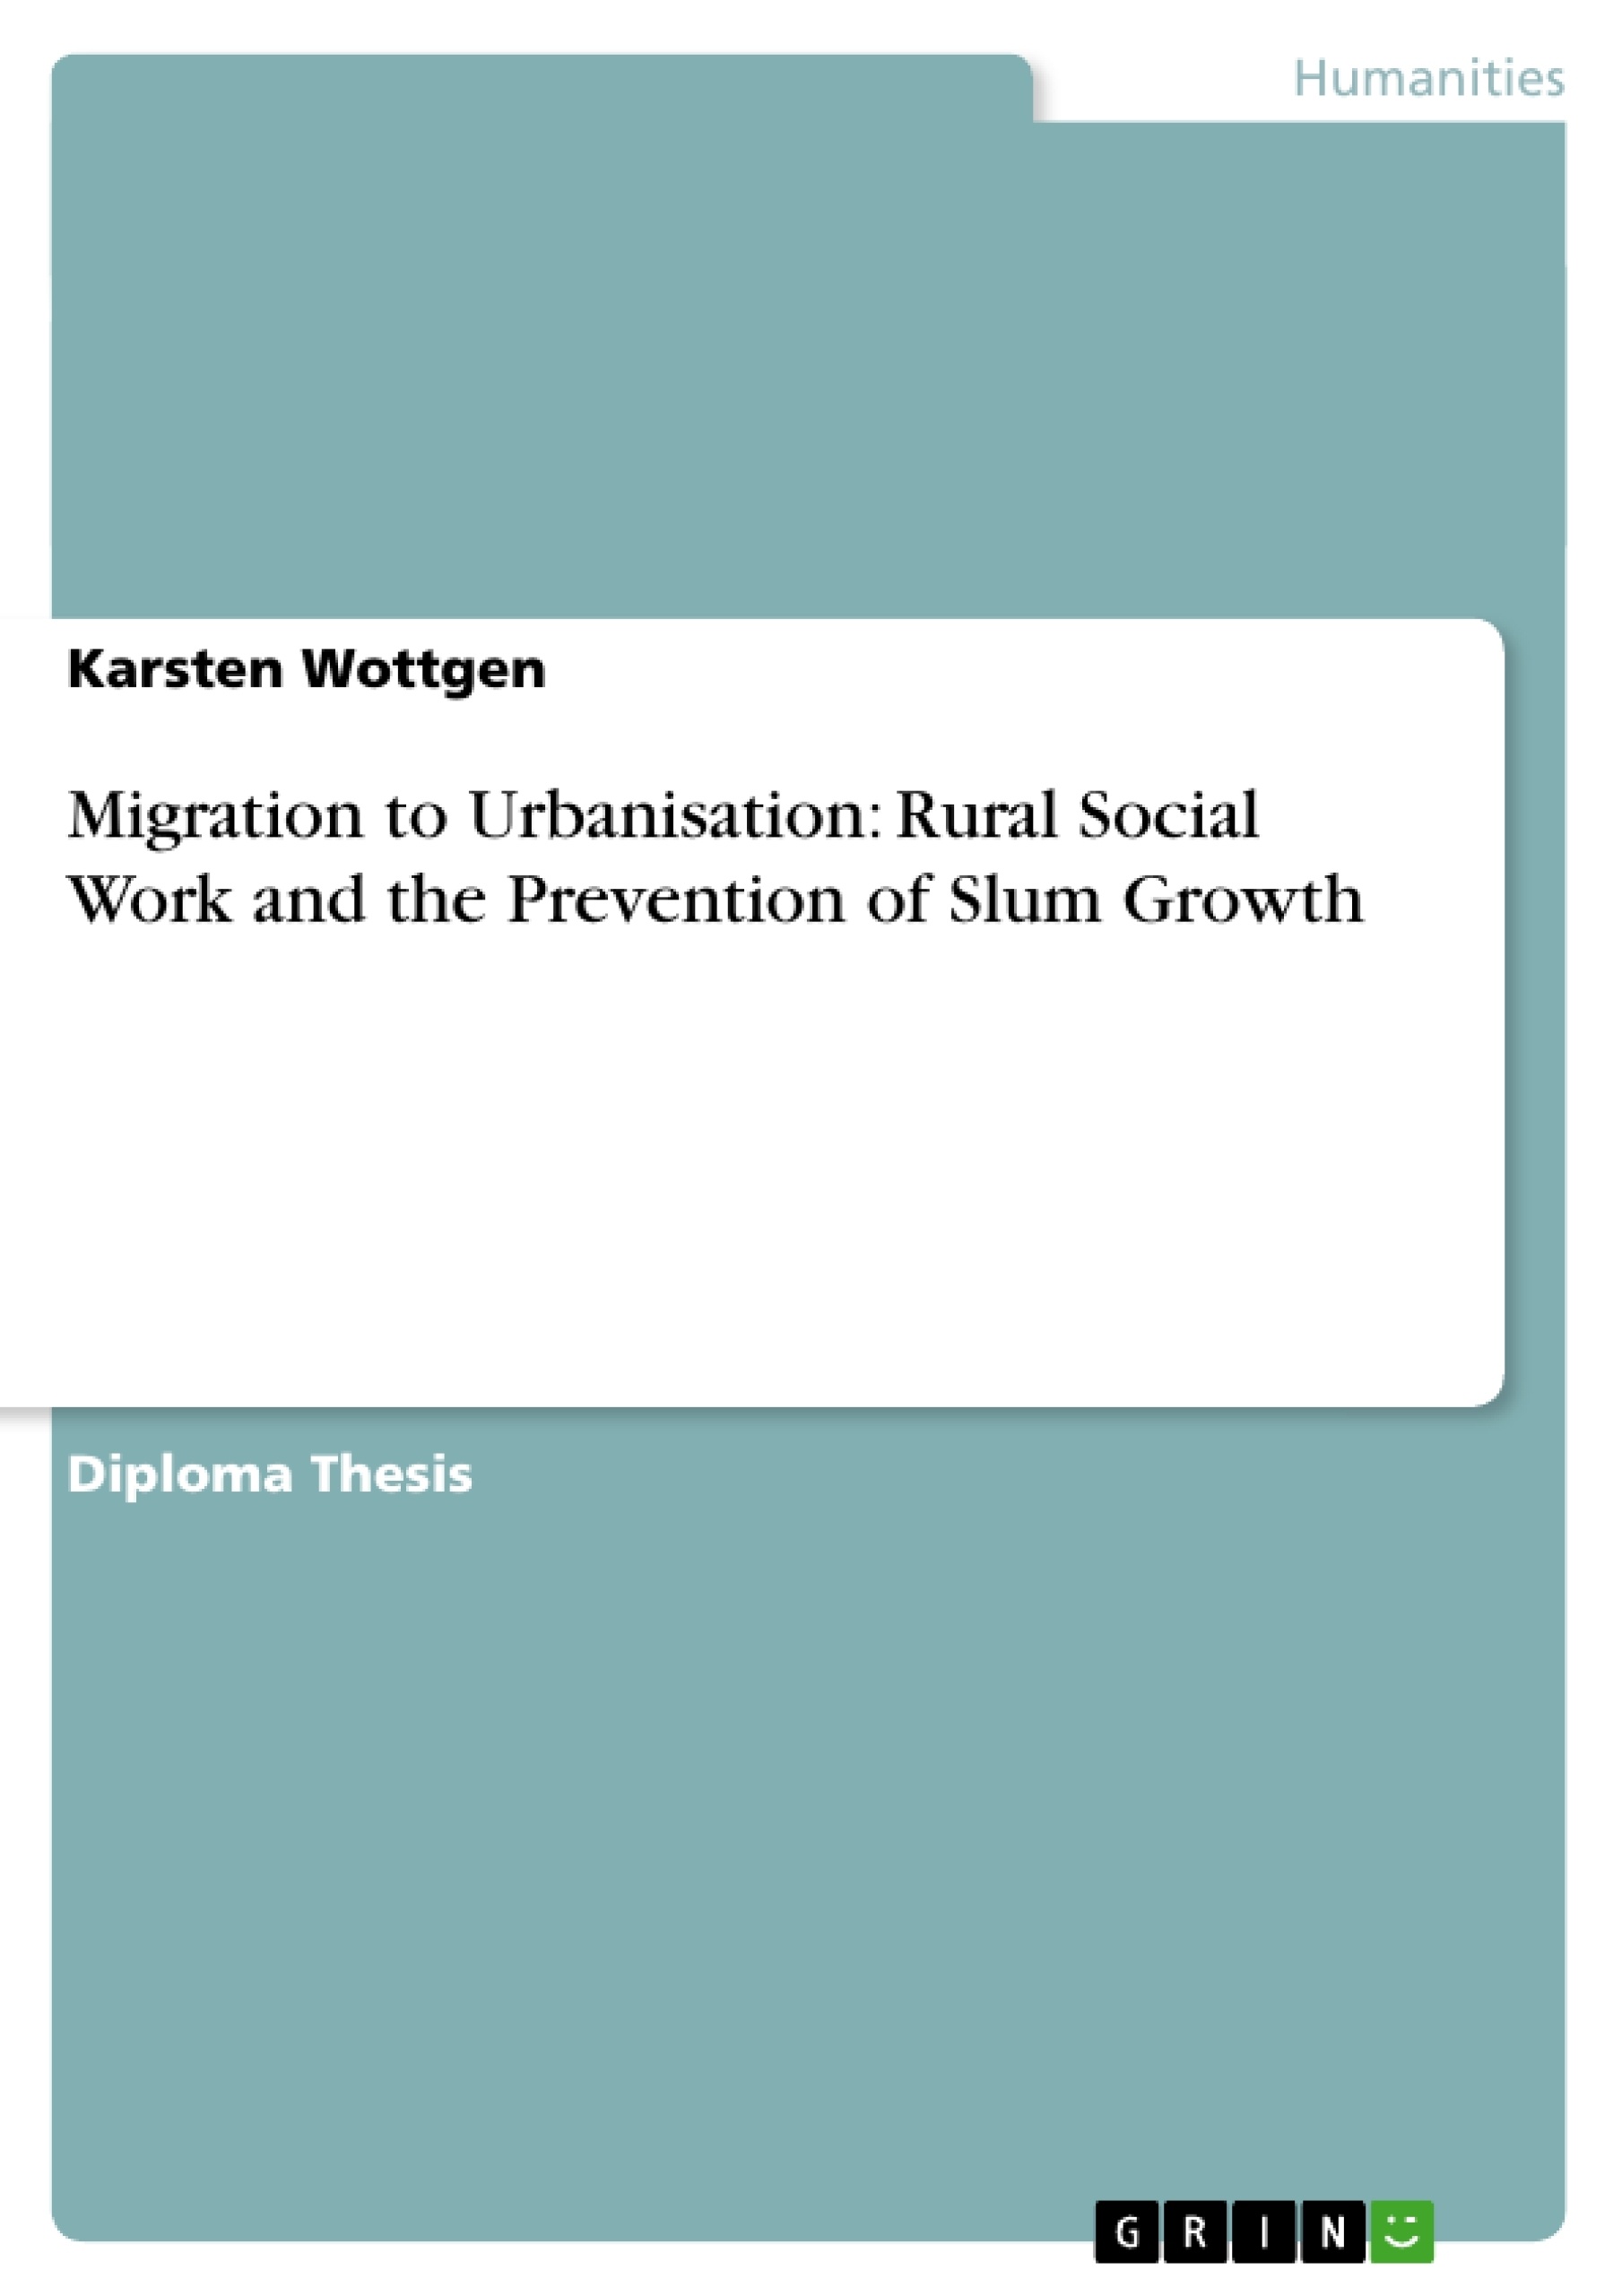 Title: Migration to Urbanisation: Rural Social Work and the Prevention of Slum Growth